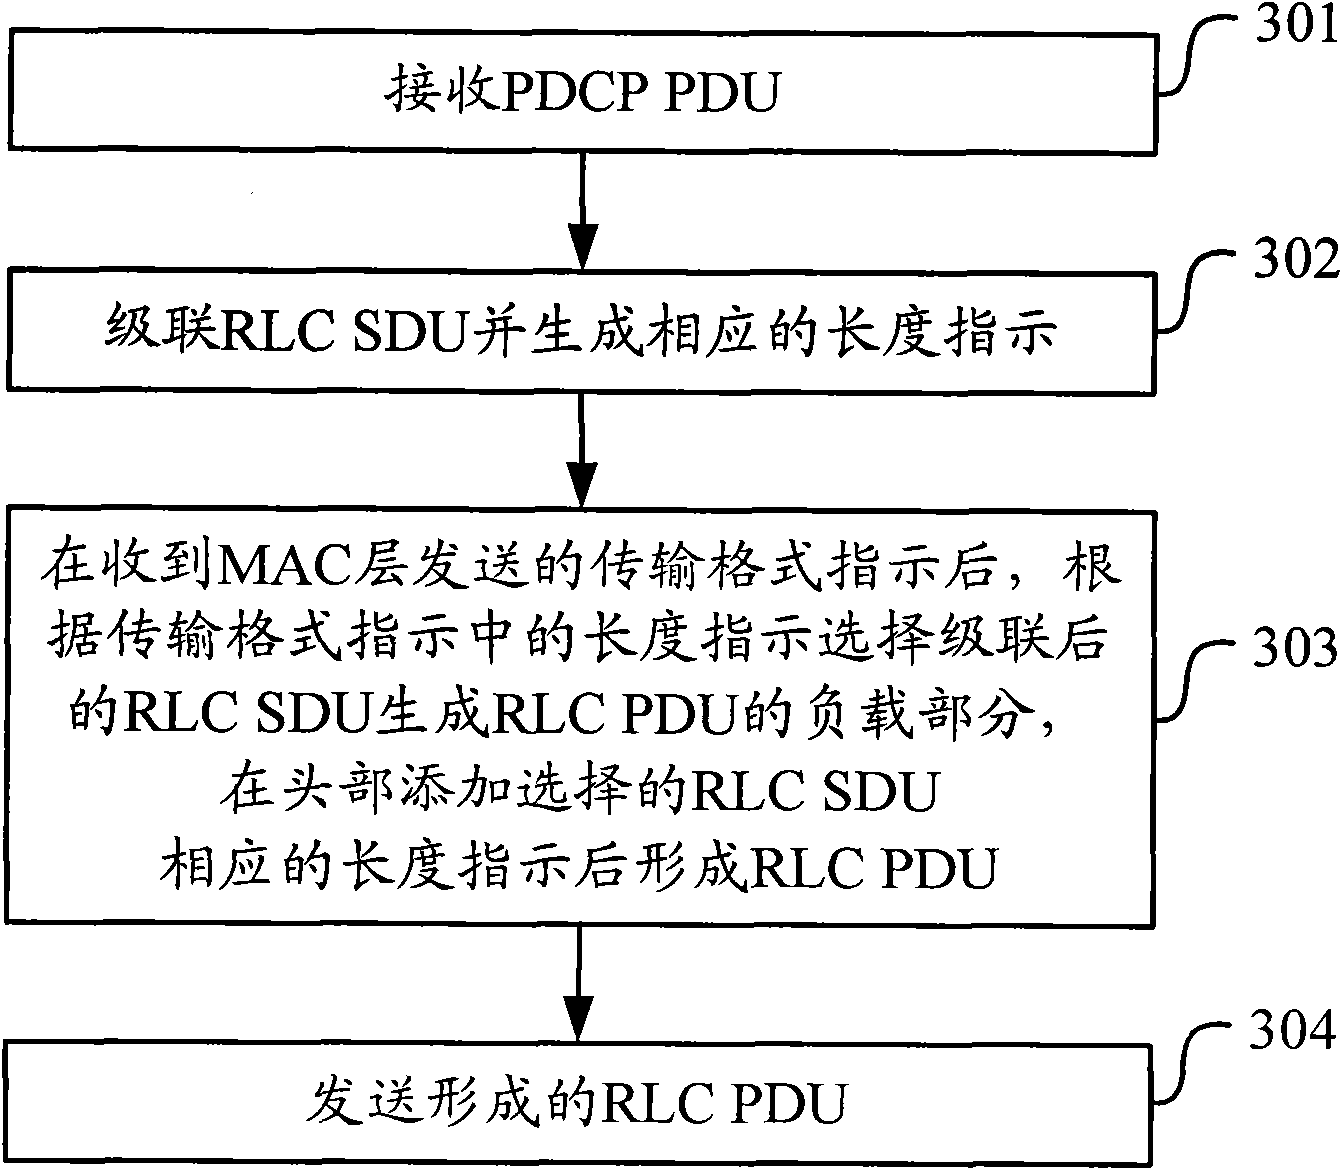 Data sending and processing method and equipment for data link layer